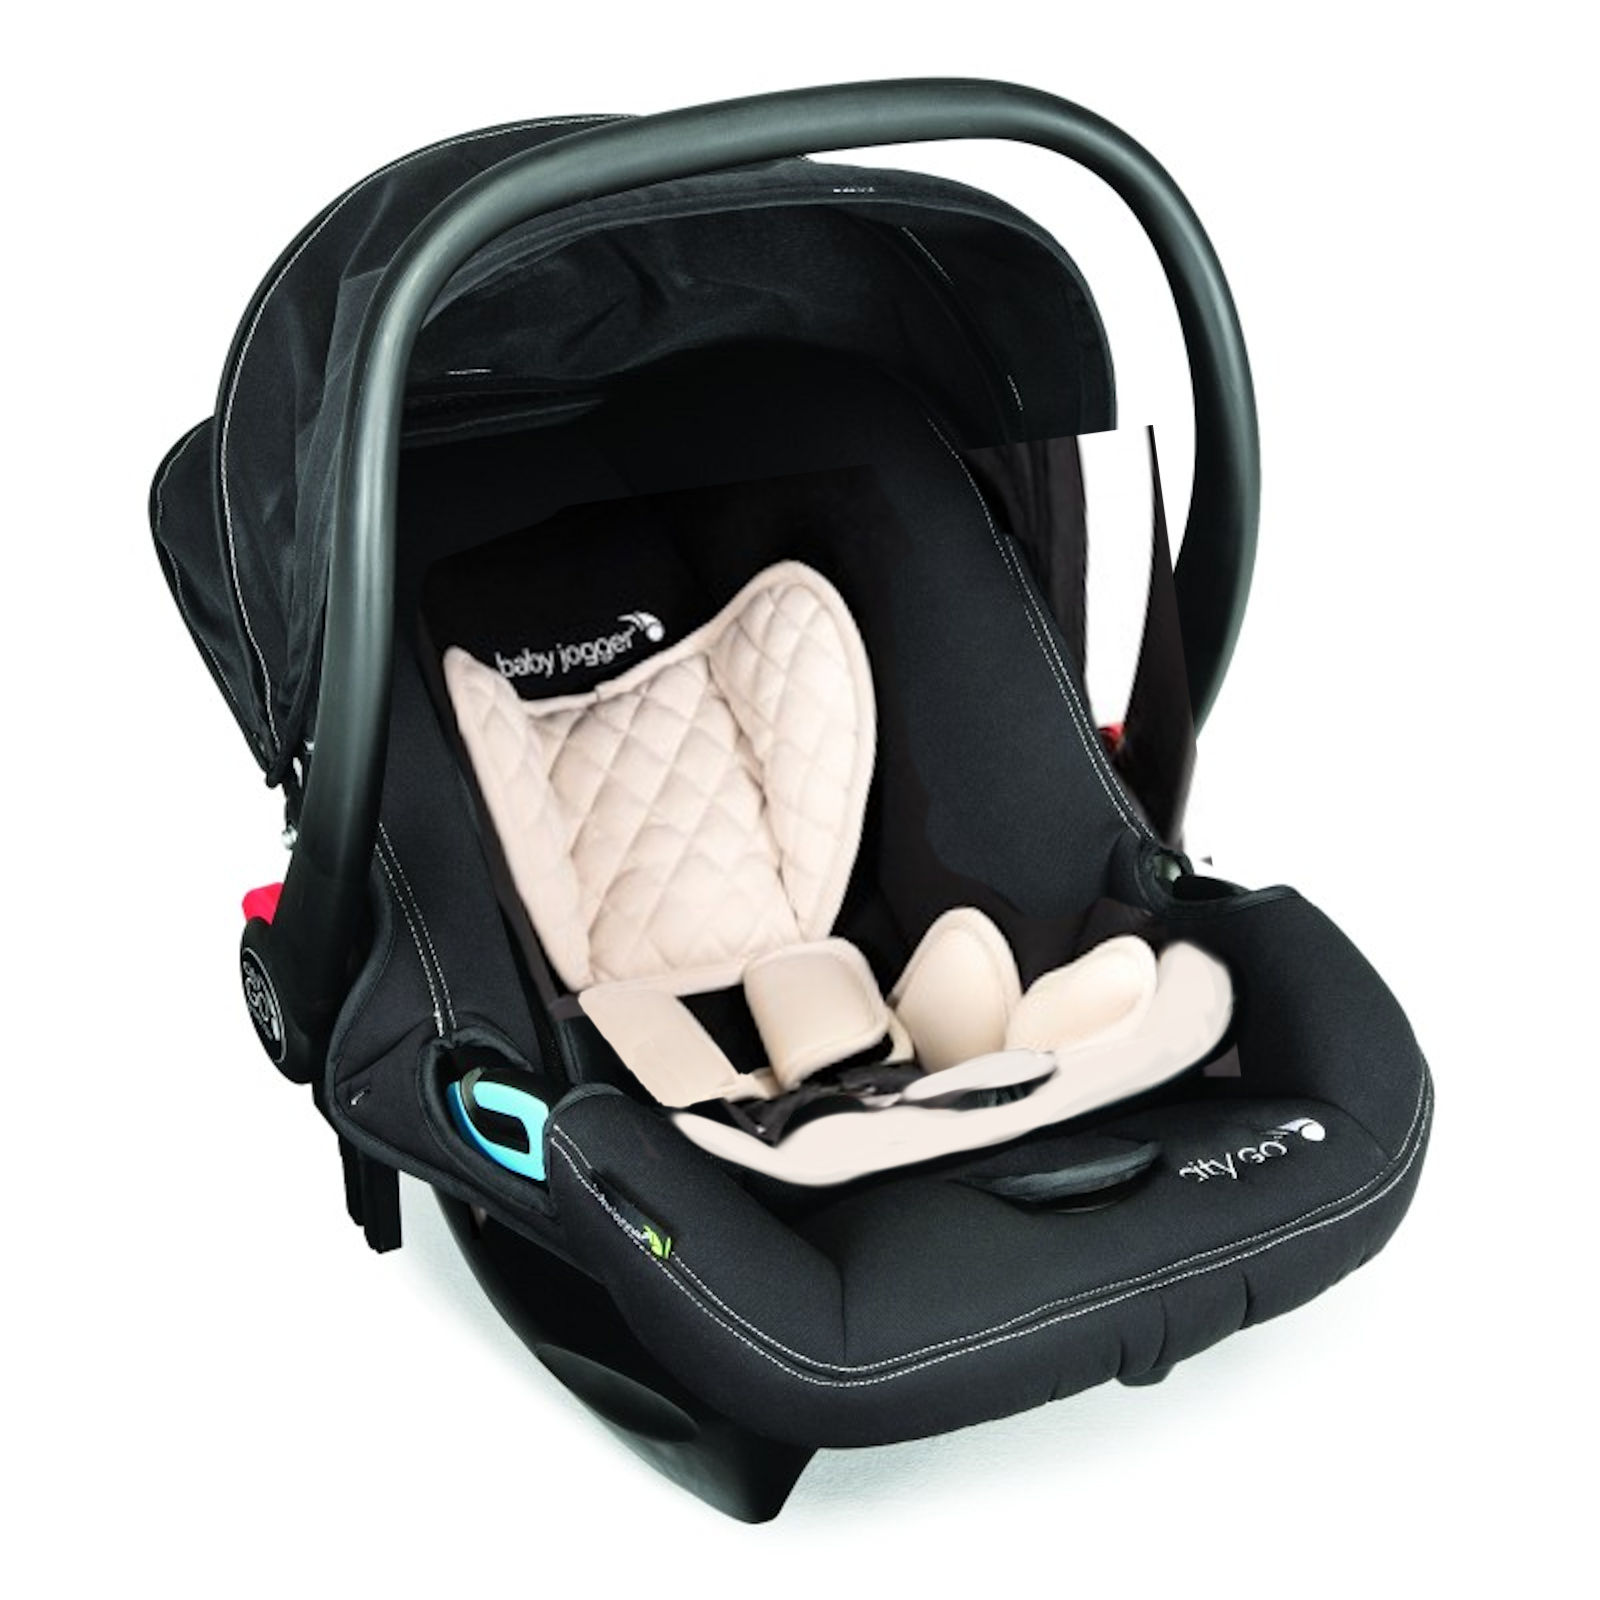 Buy baby carrier seat - 54% OFF!